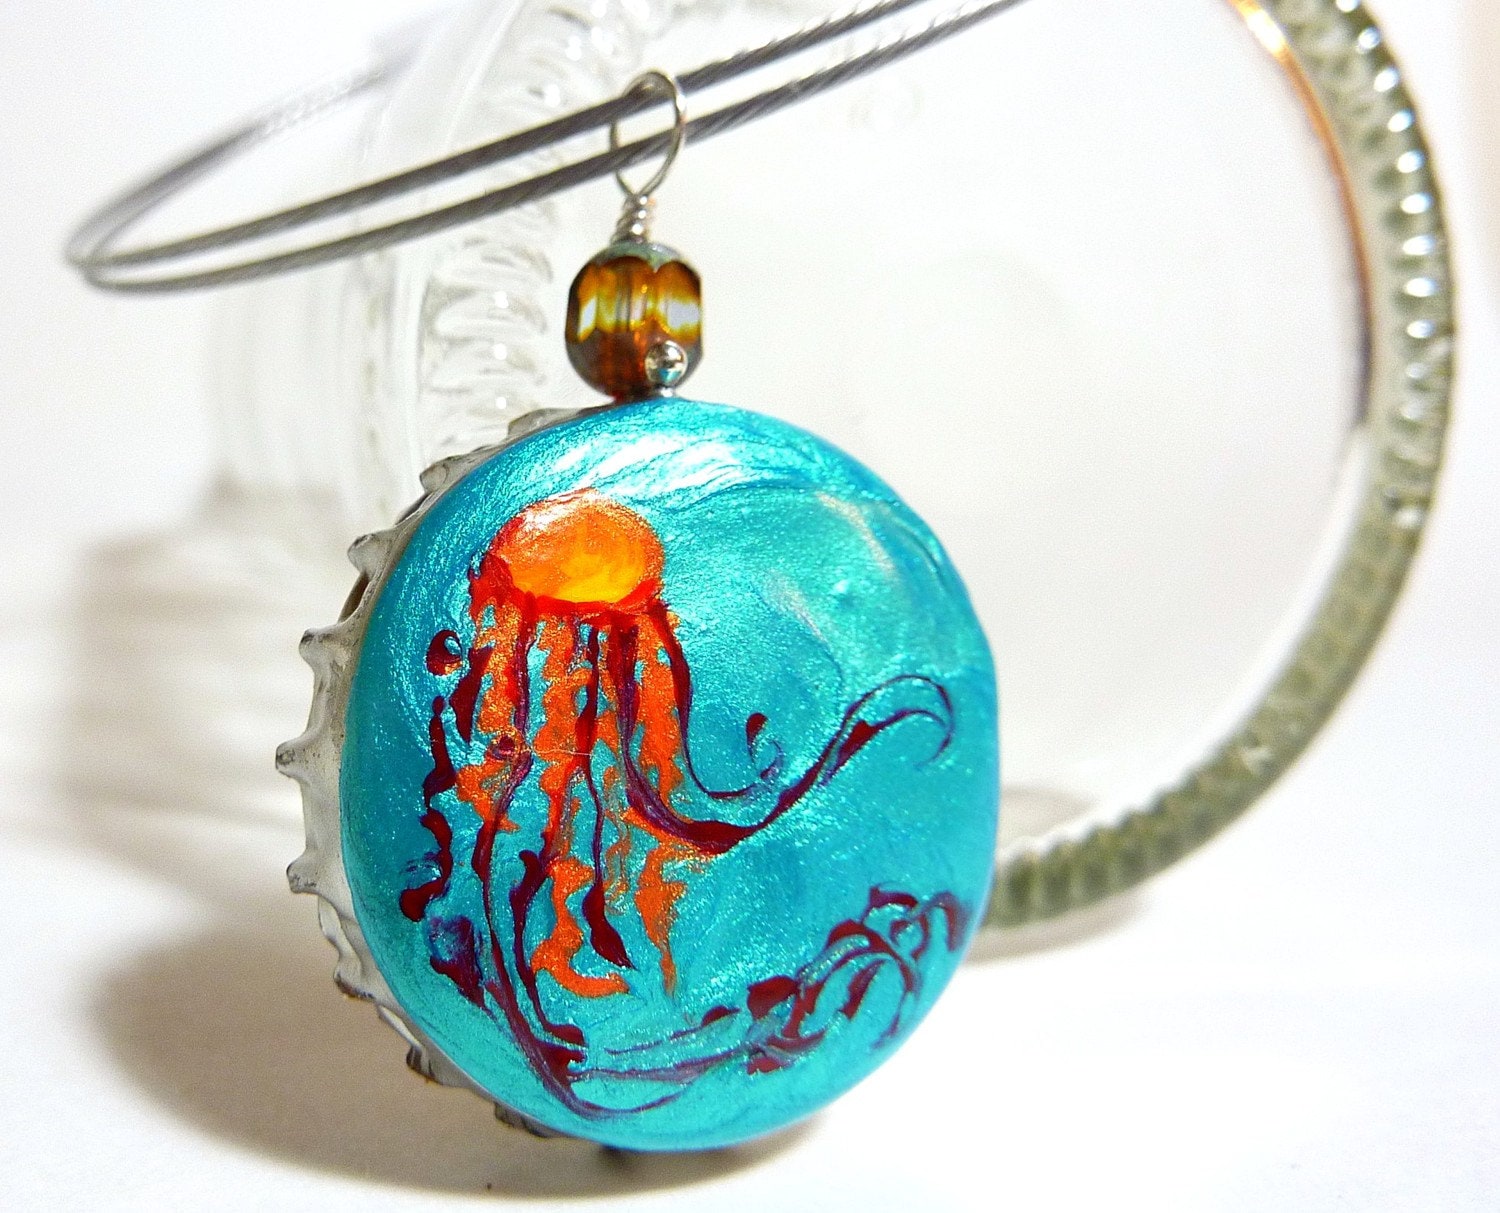 Bottle  Necklace on Jellyfish Bottle Cap Necklace   Danger In By Somewhathip On Etsy